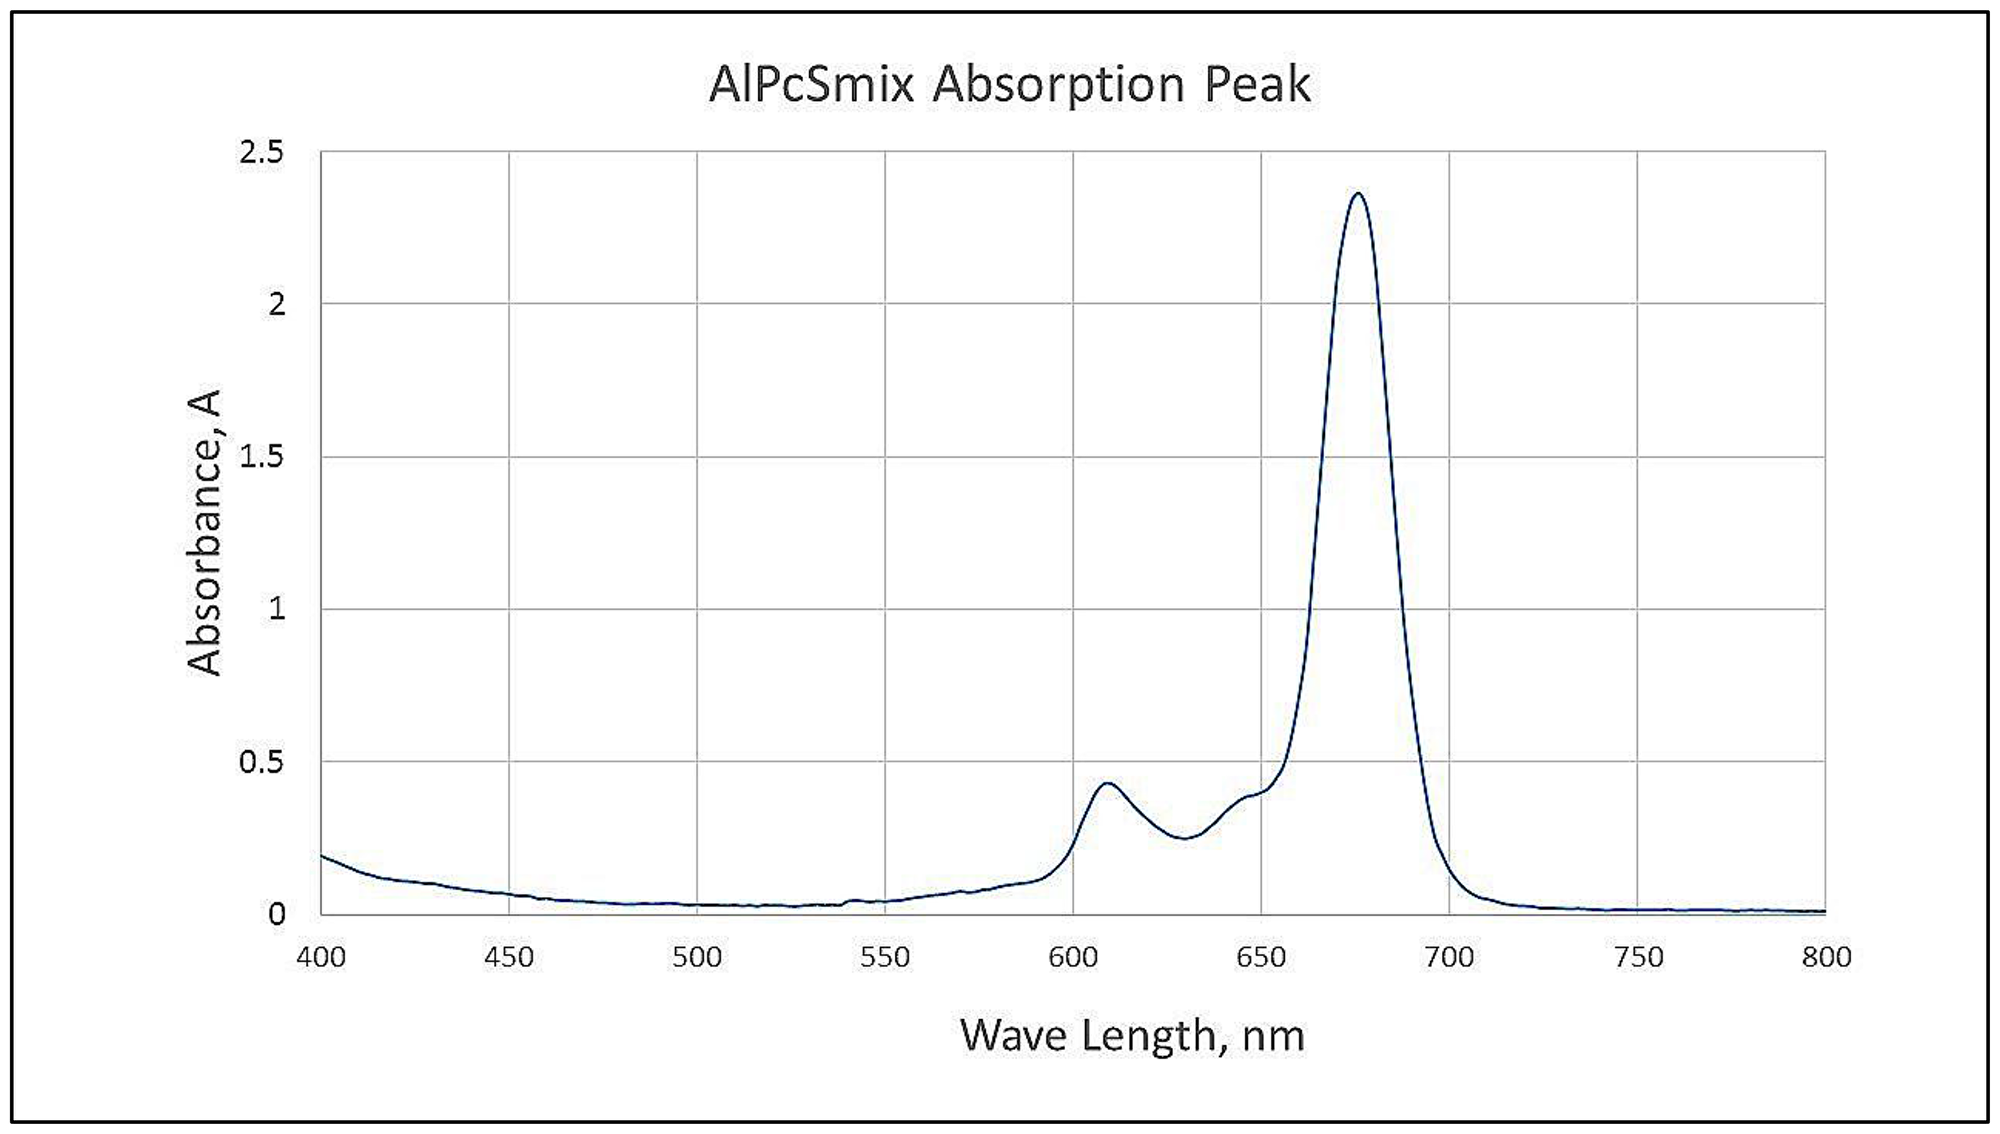 Spectrophotometric analysis of AlPcSmix showing the maximum absorption/excitation peak at 674 nm.